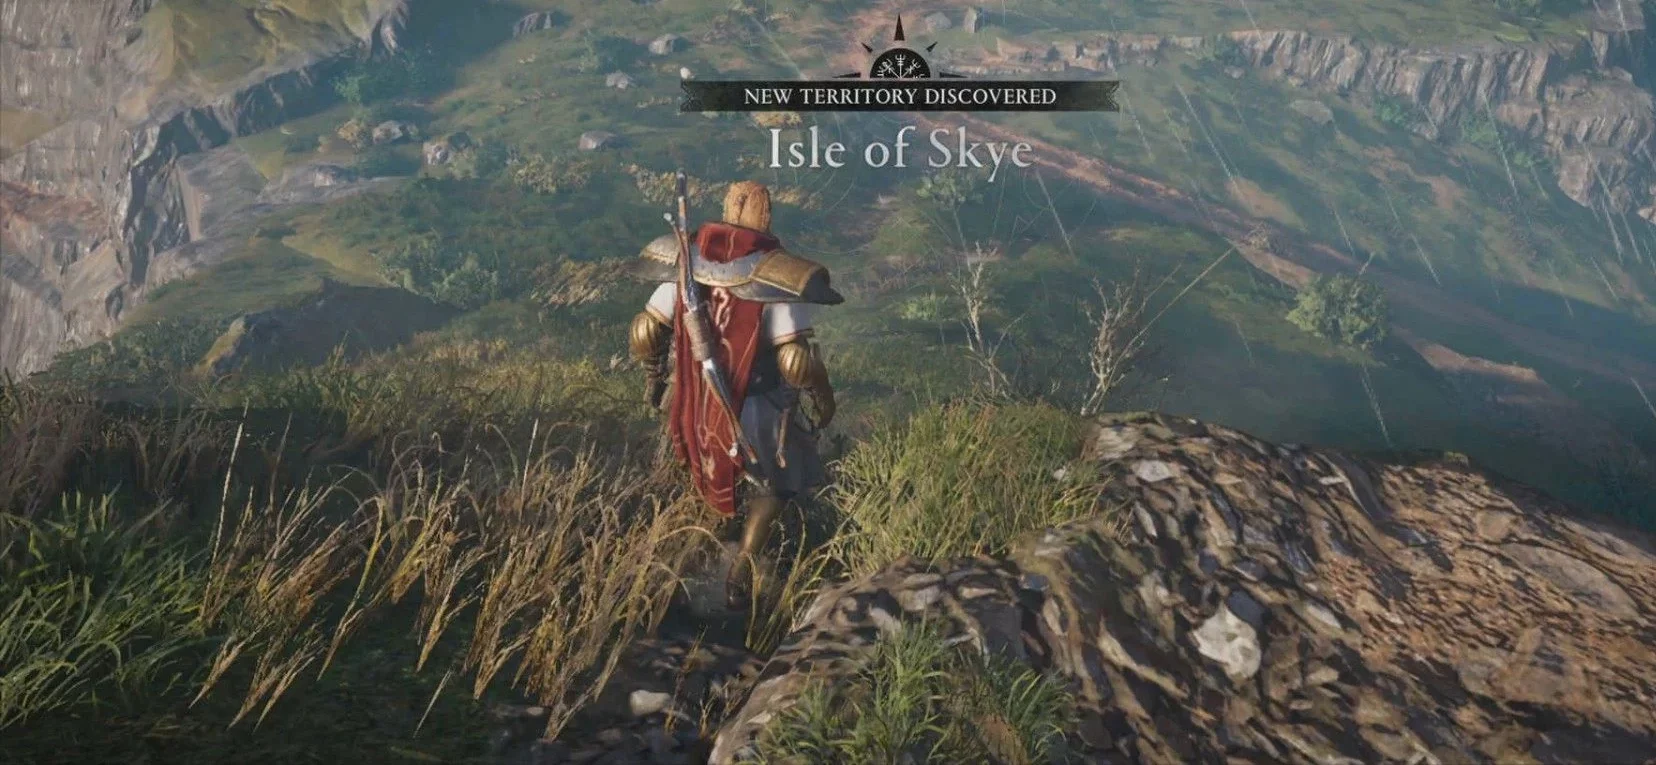 How to Complete Isle of Skye Treasure Hoard Map in AC Valhalla